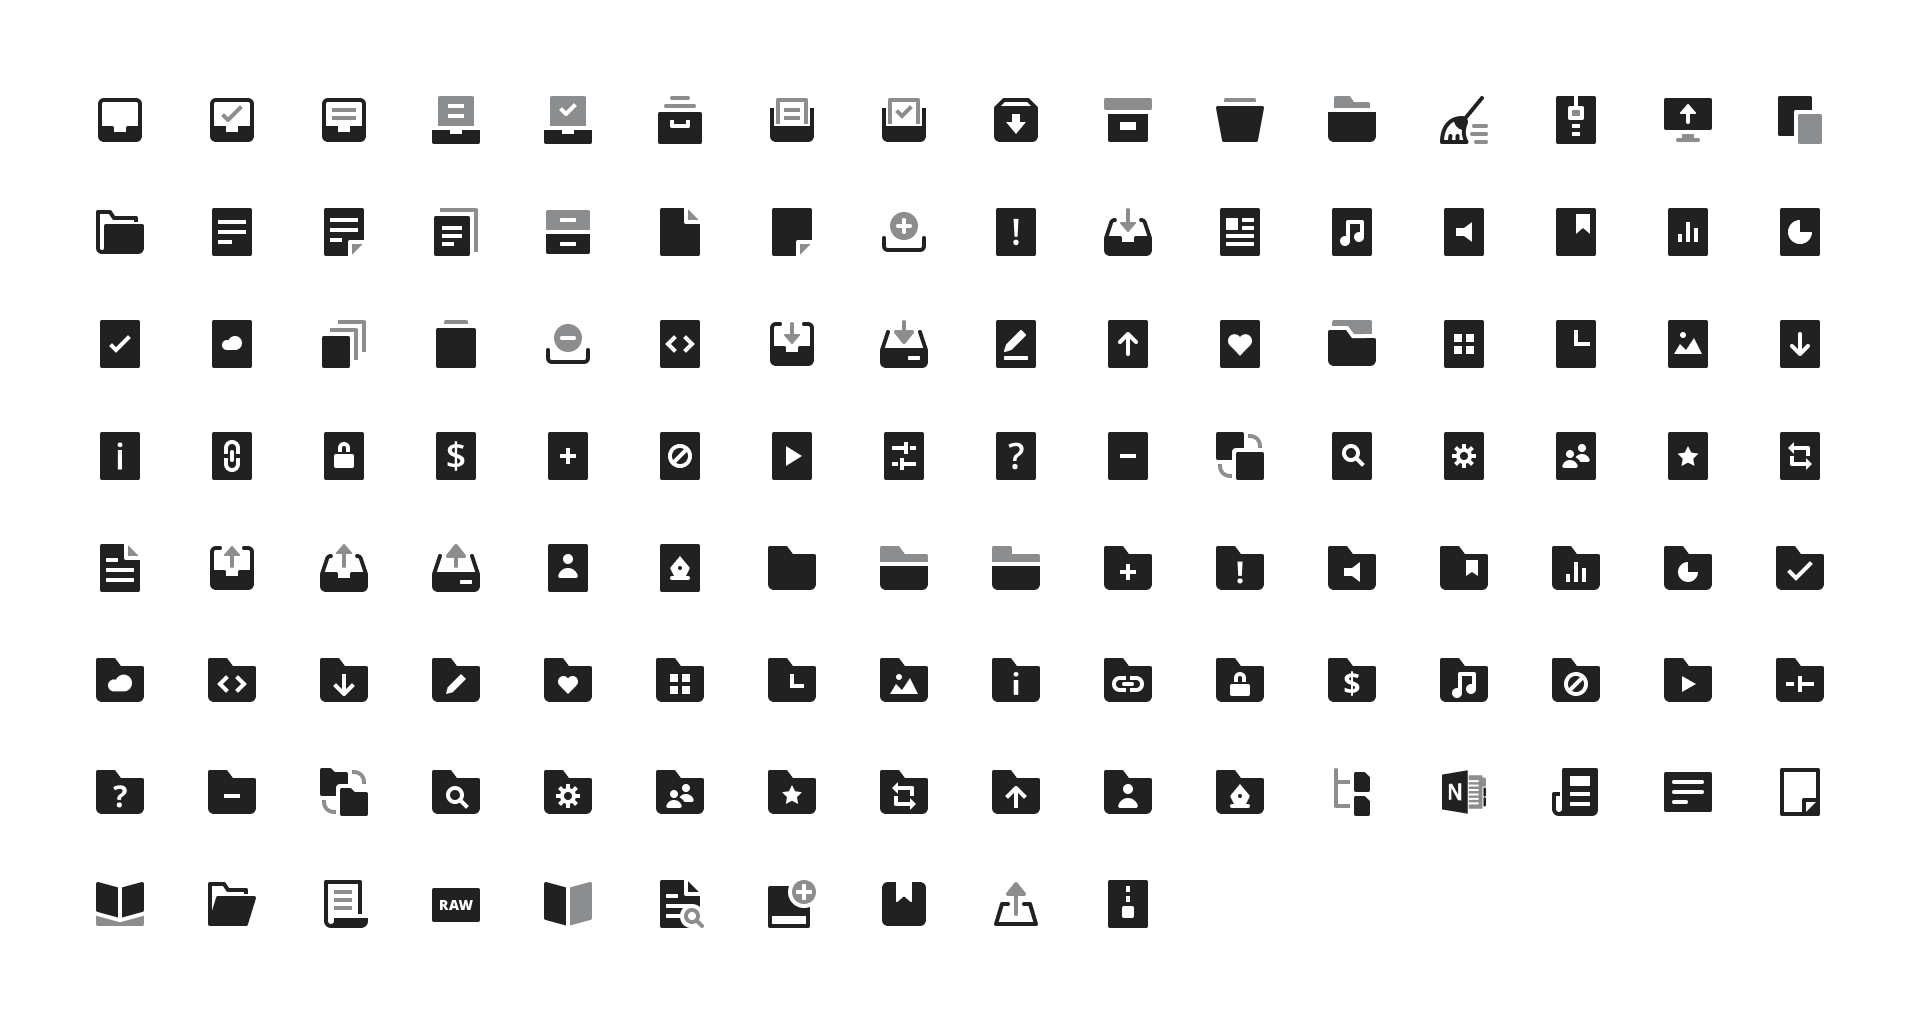 Files and Folders Icons